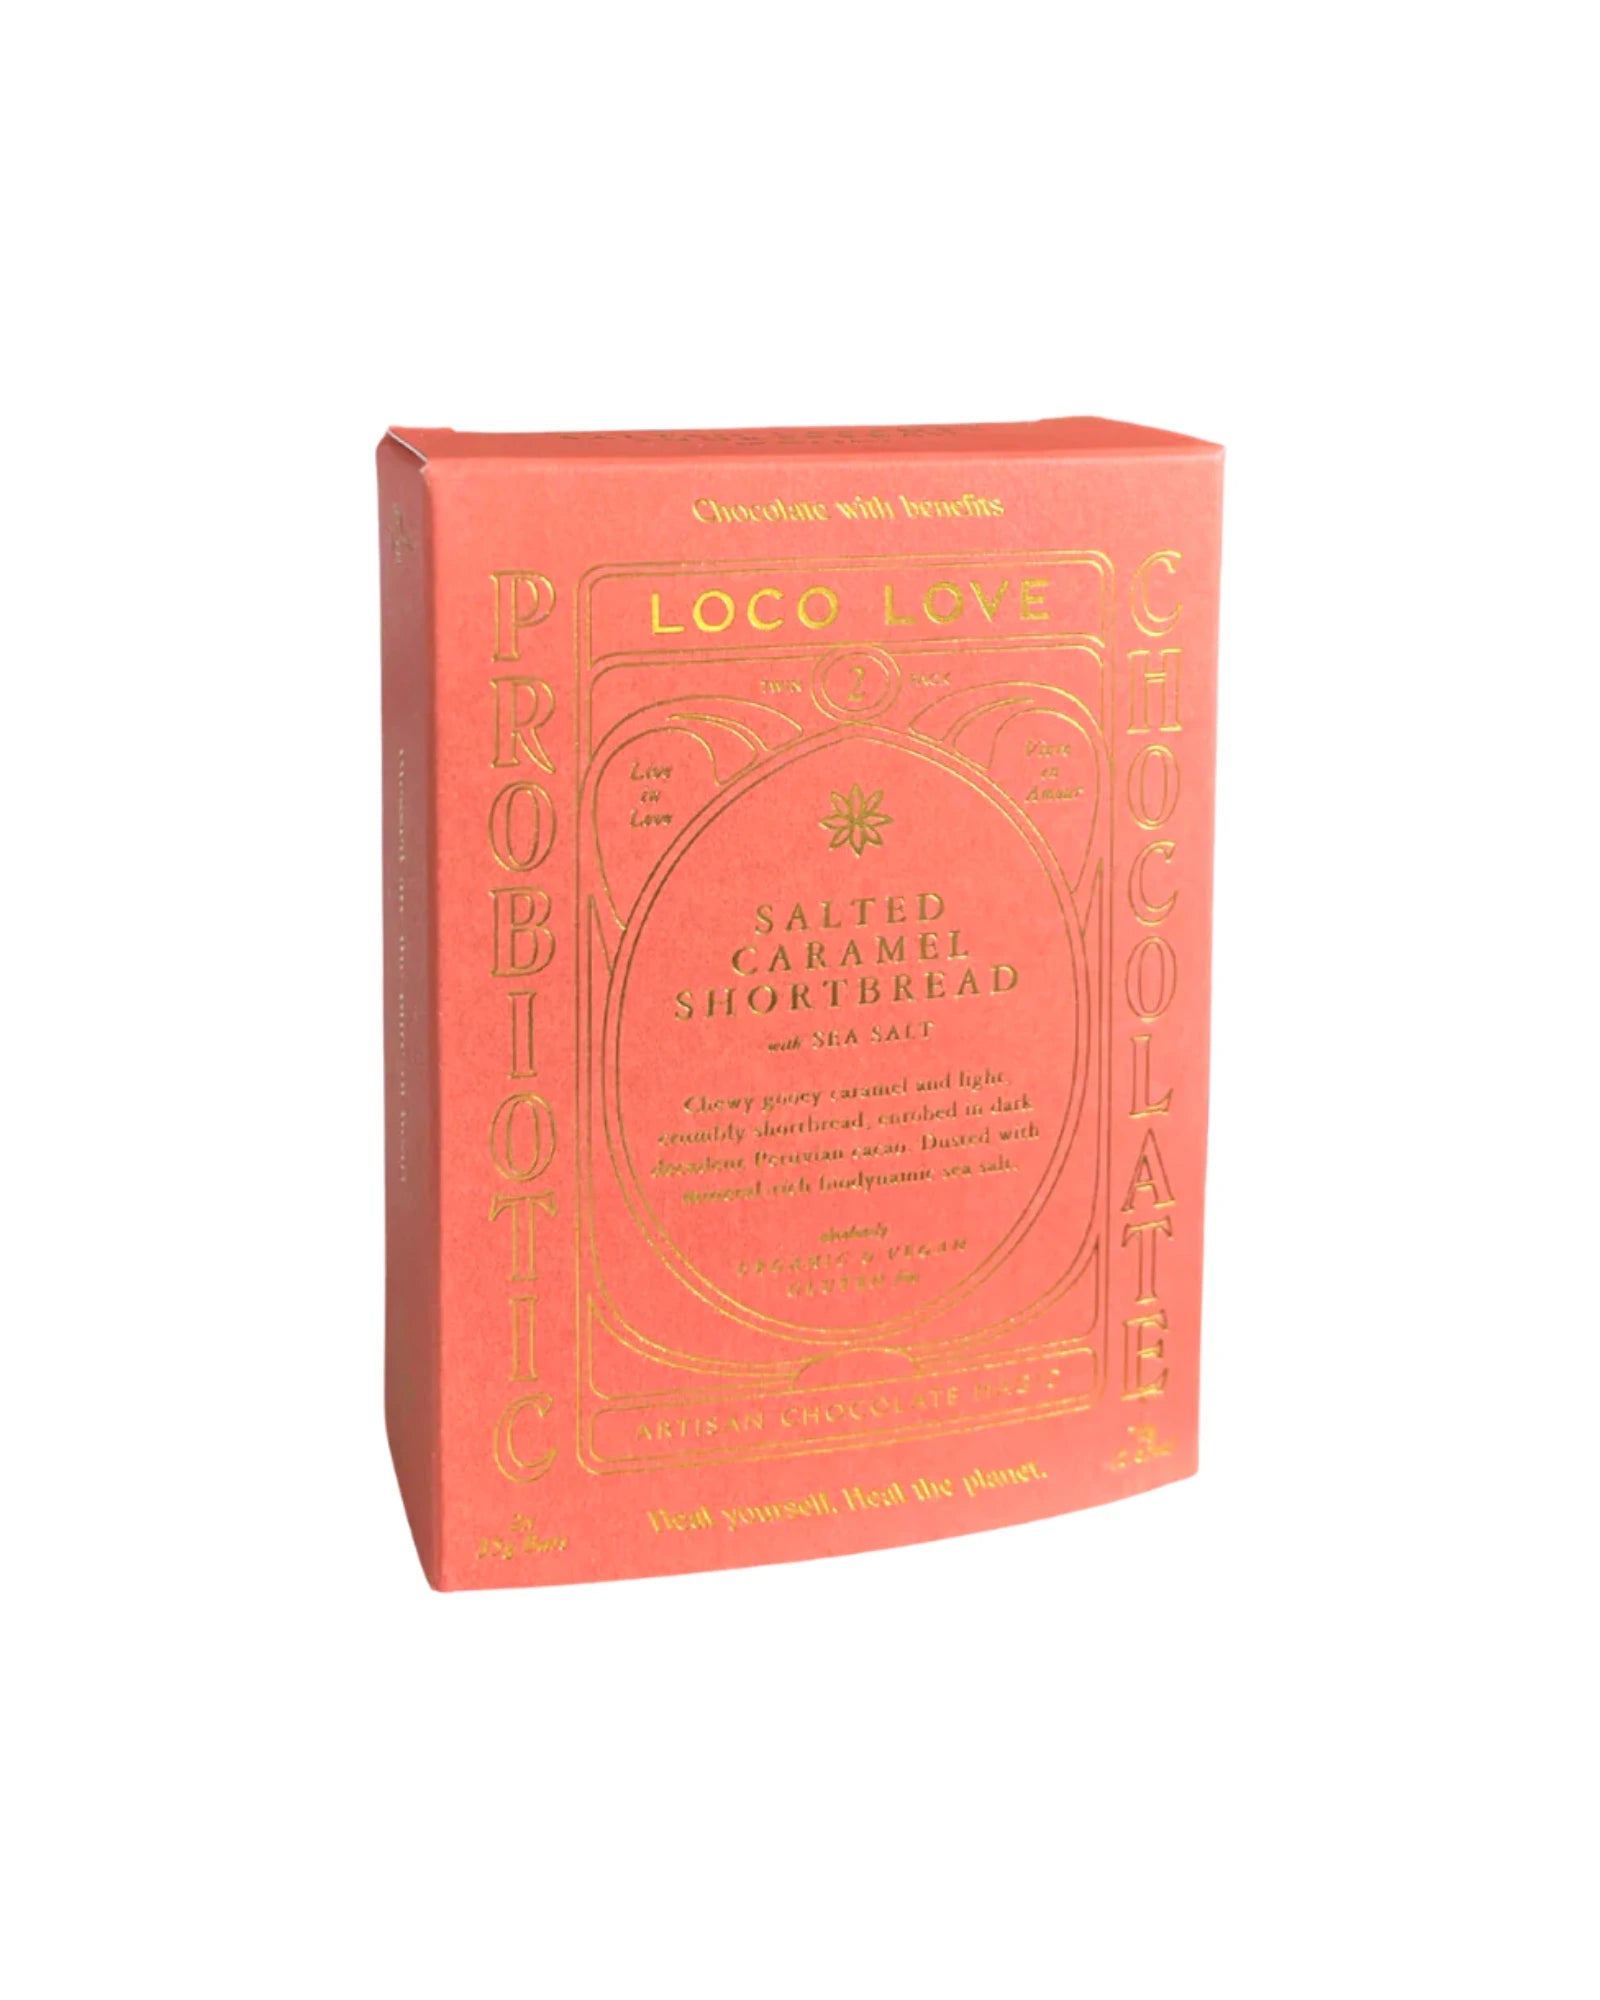 Loco Love Chocolate - Salted Caramel Shortbread - Twin Pack 60g